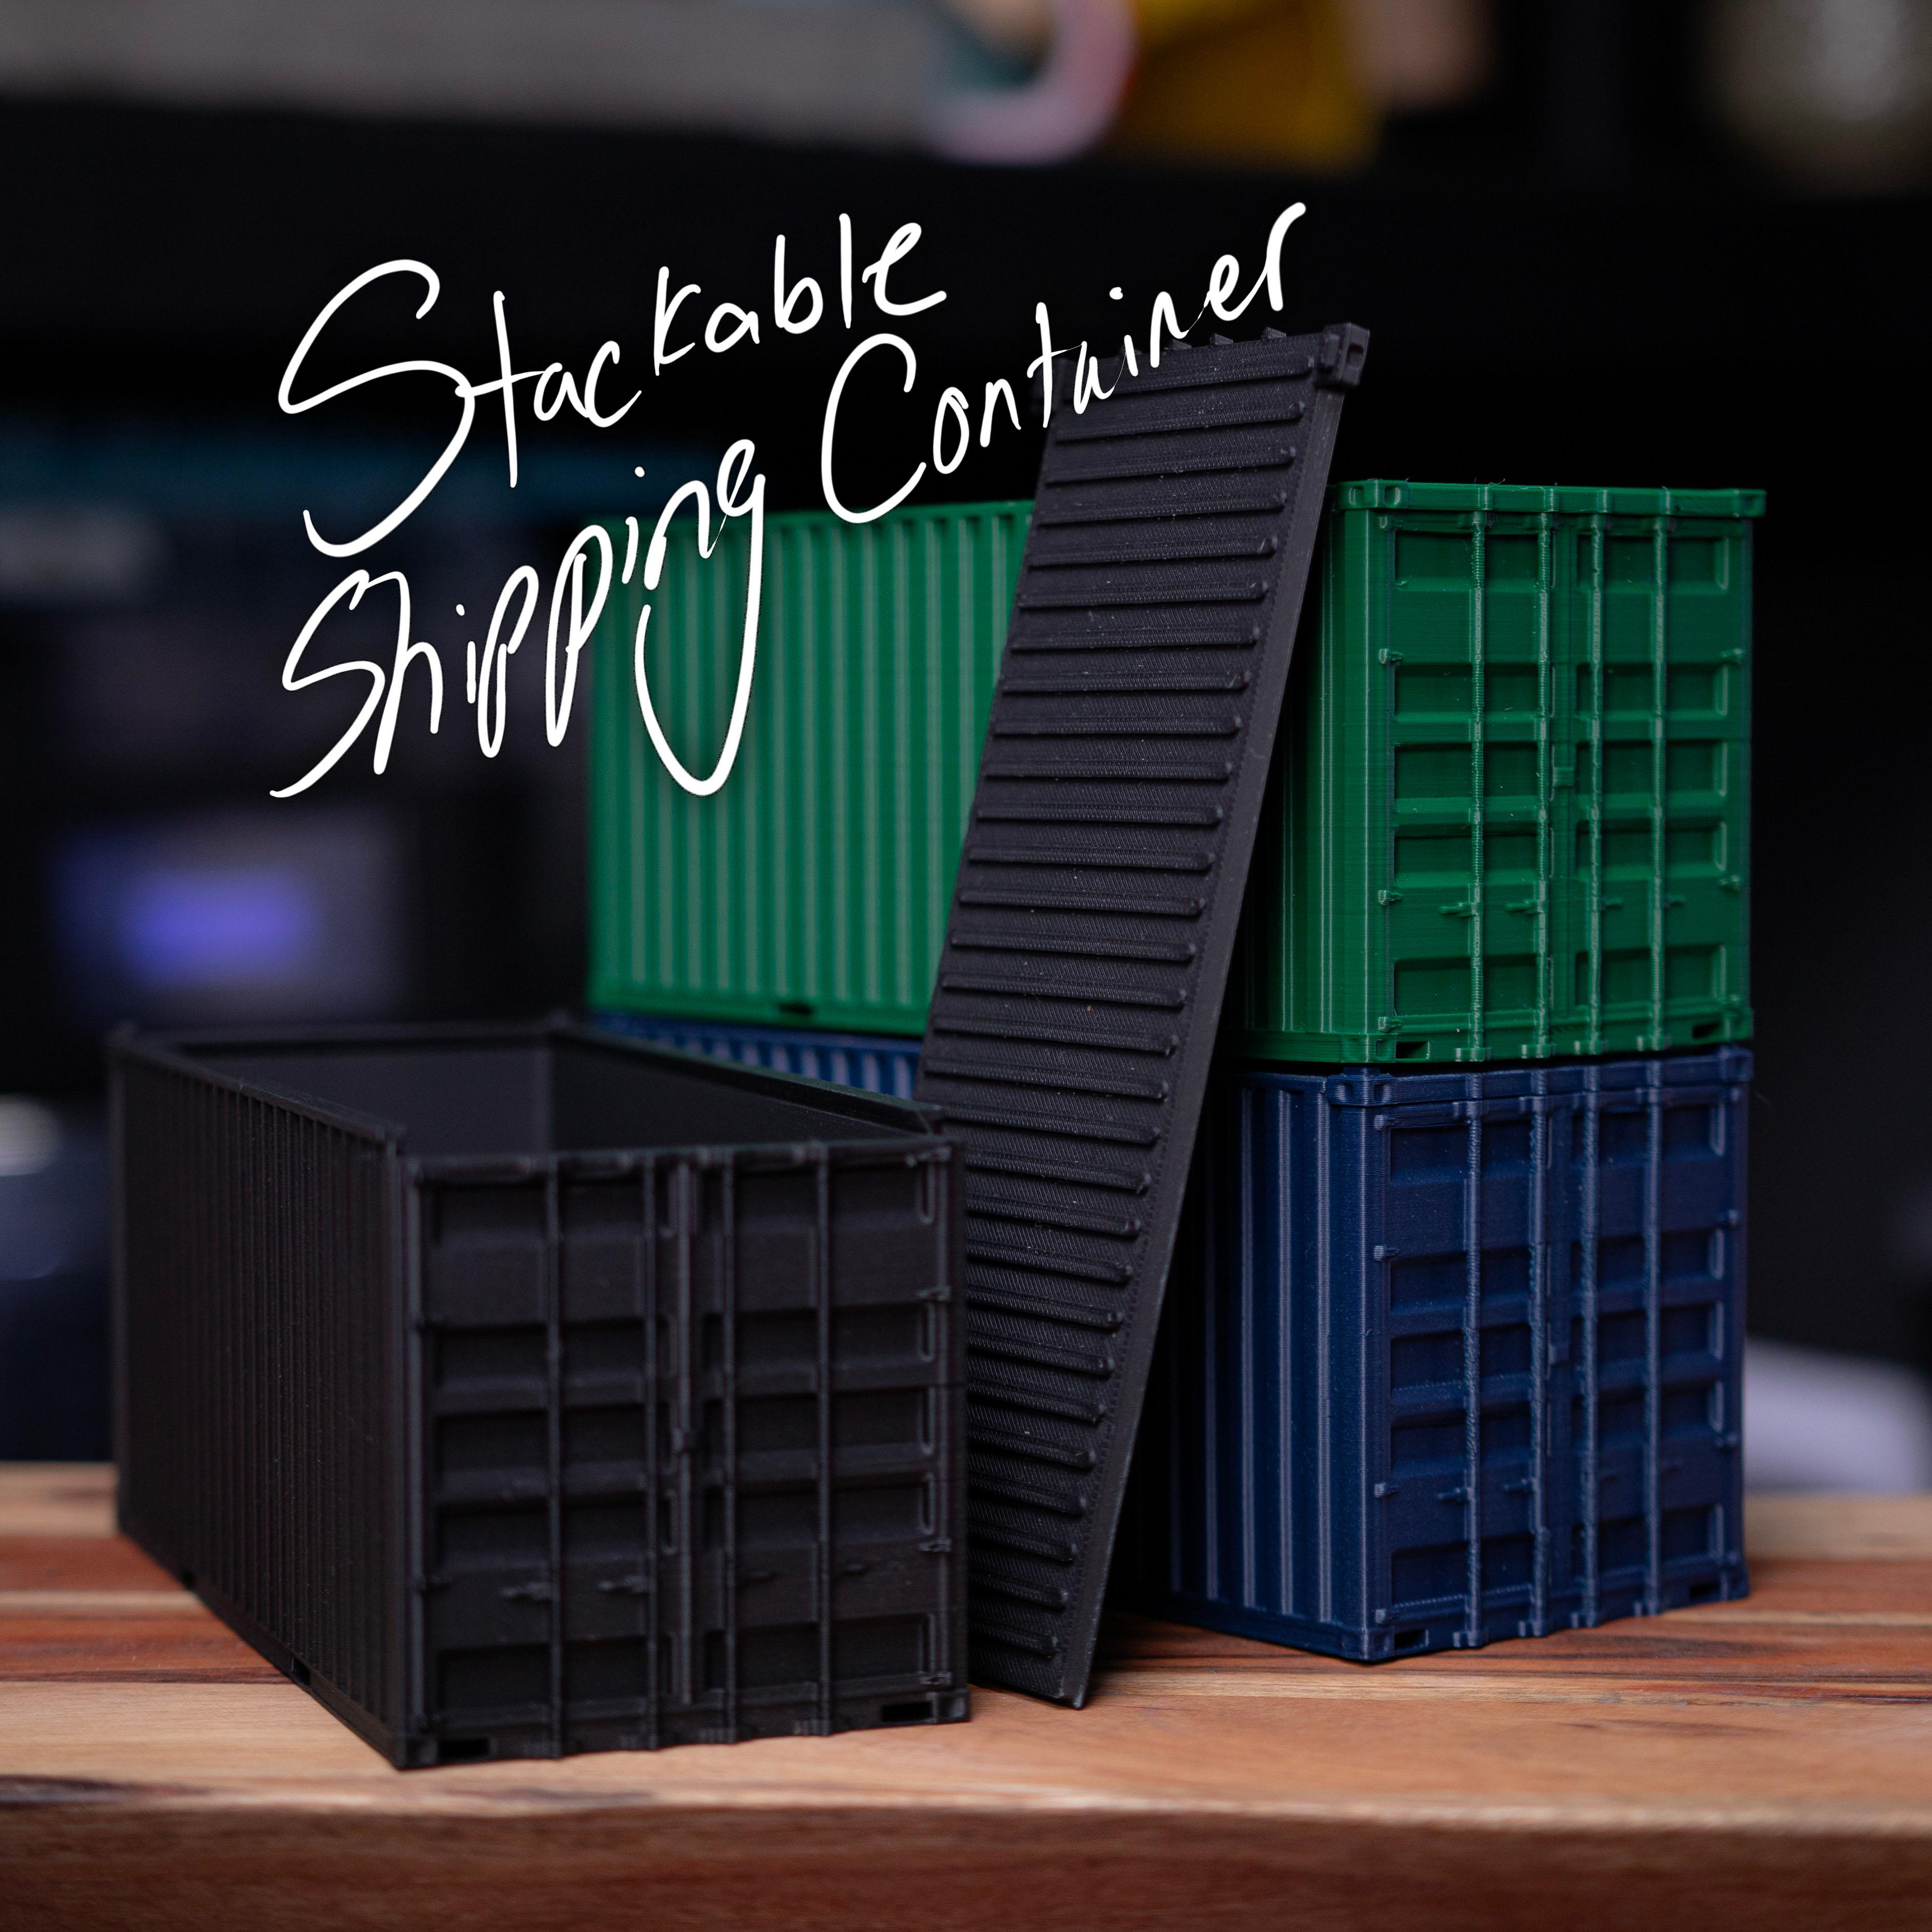 UPDATED: Shipping Container Organizer now is stackable